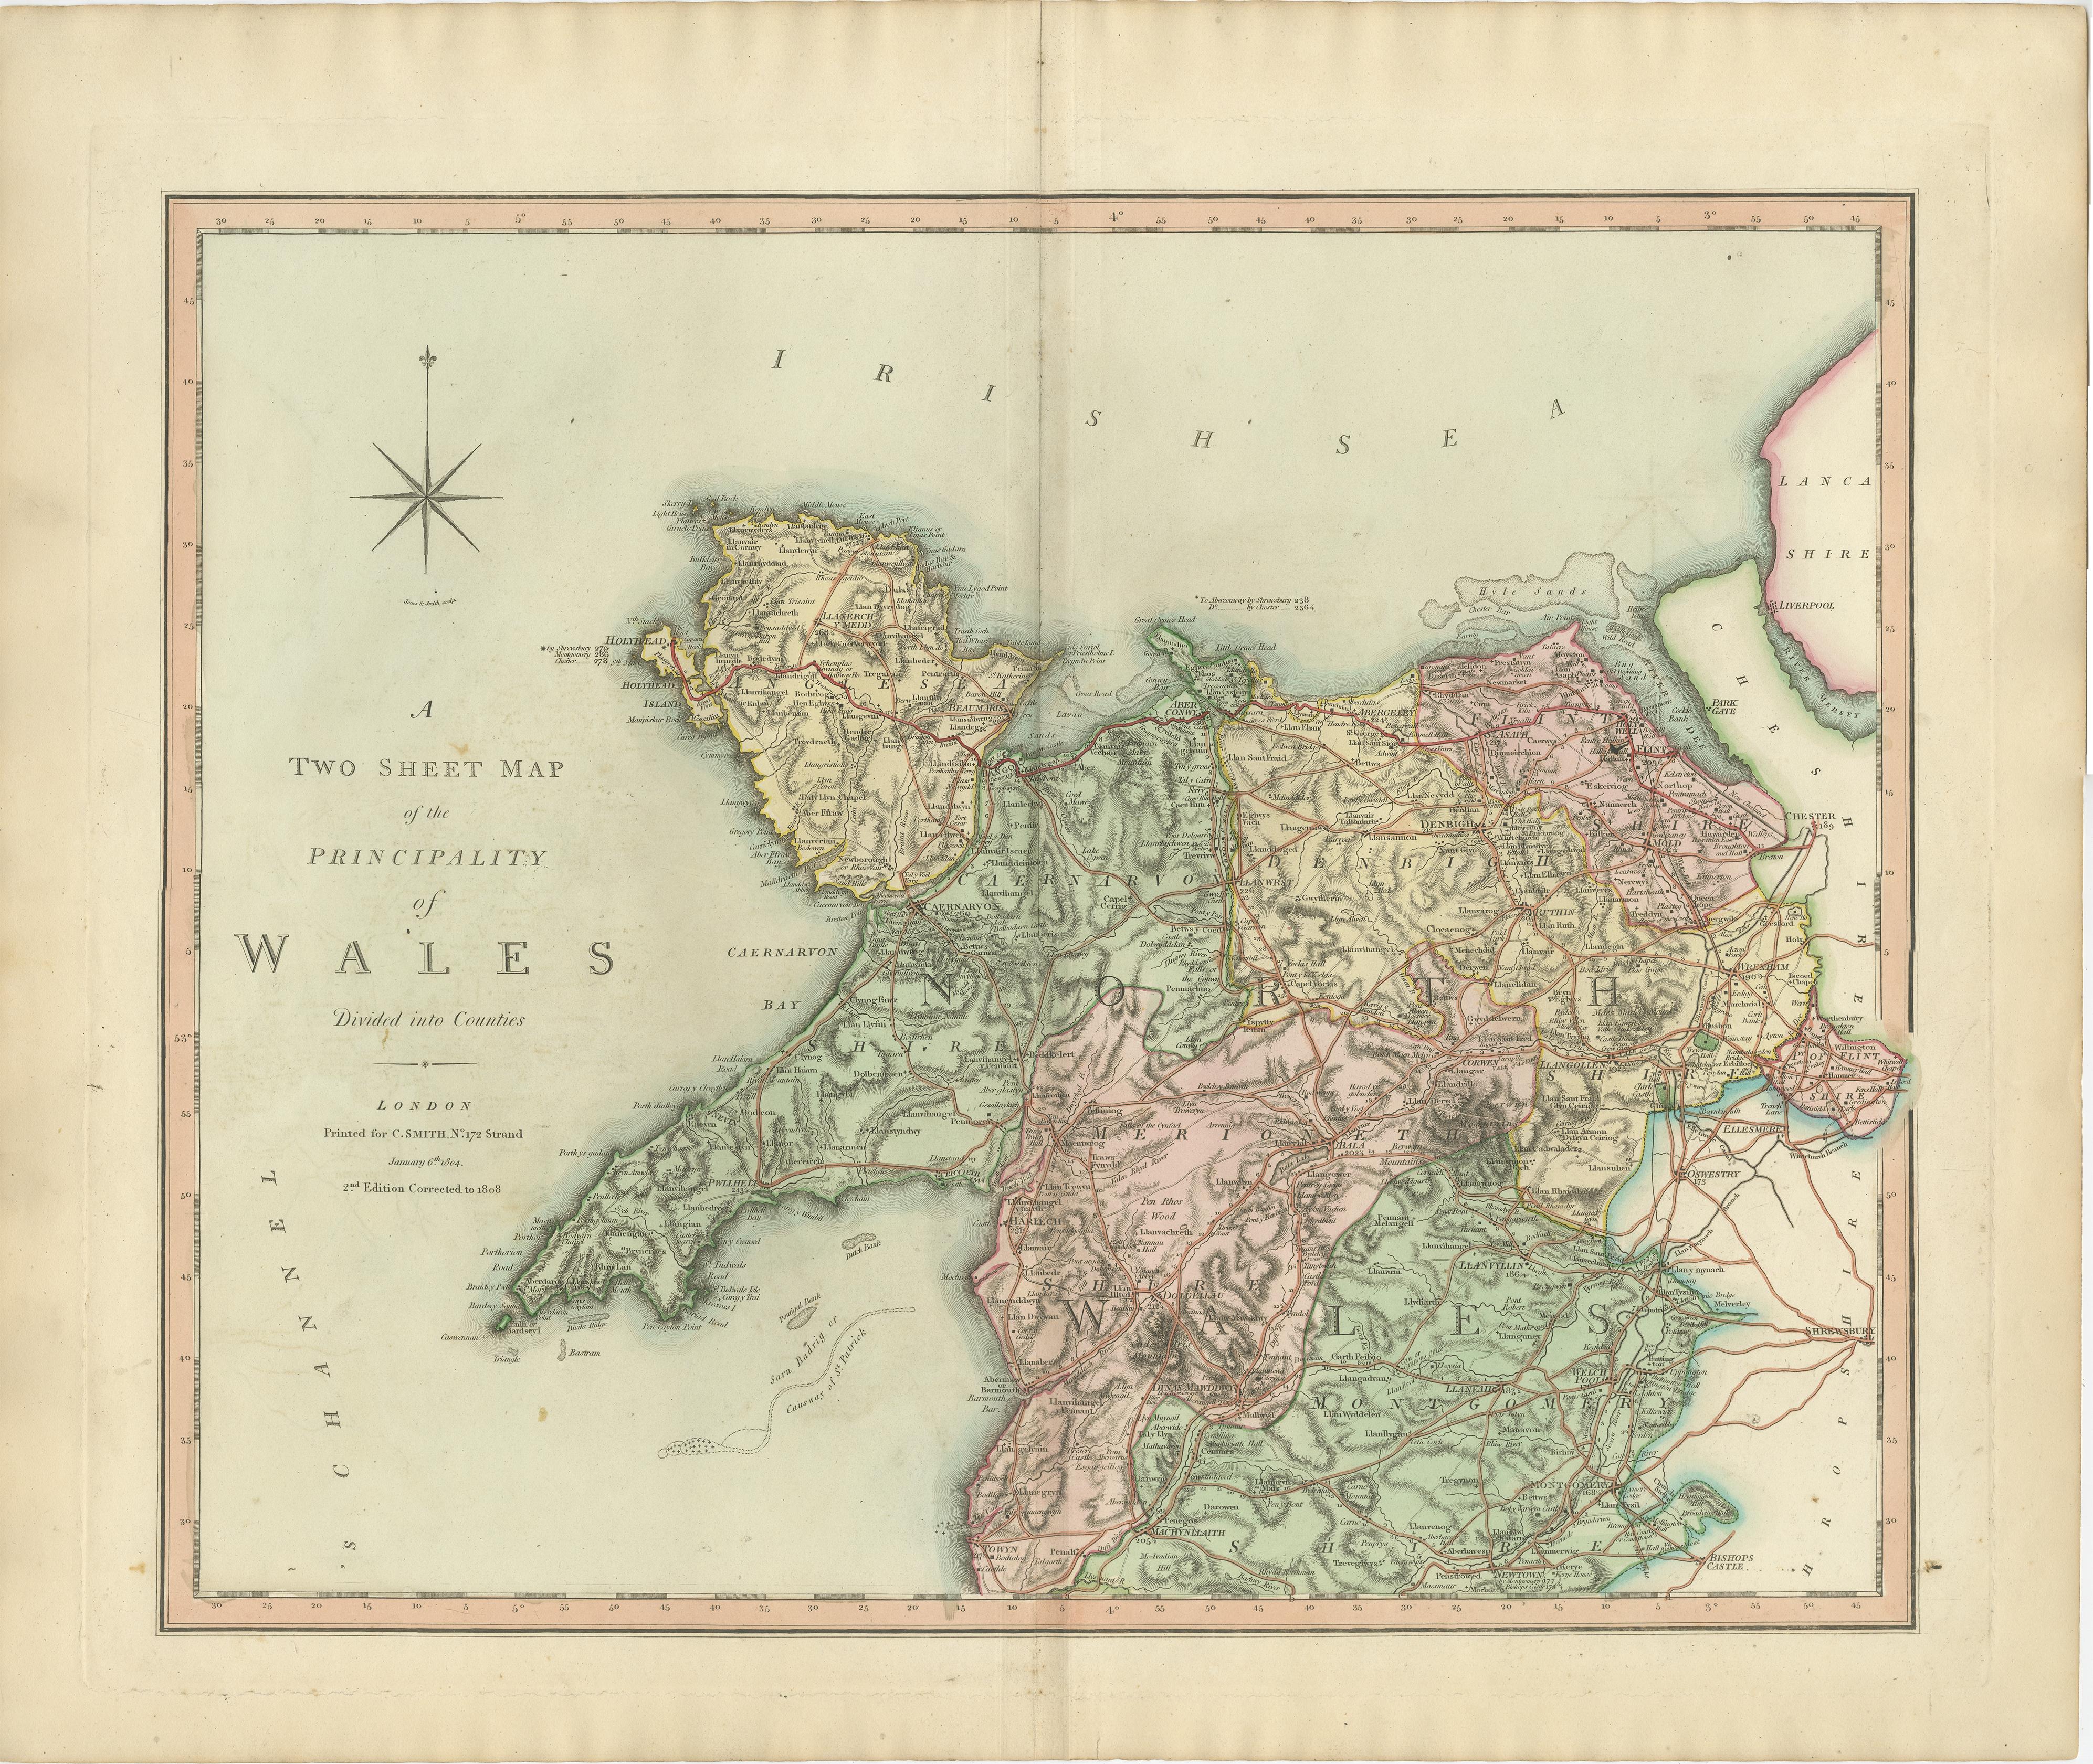 A well engraved and detailed large-scale map of Wales, printed on two sheets .

The map is thoroughly detailed and includes good information regarding the turnpike and mail roads as well as distances between market towns and also the canal